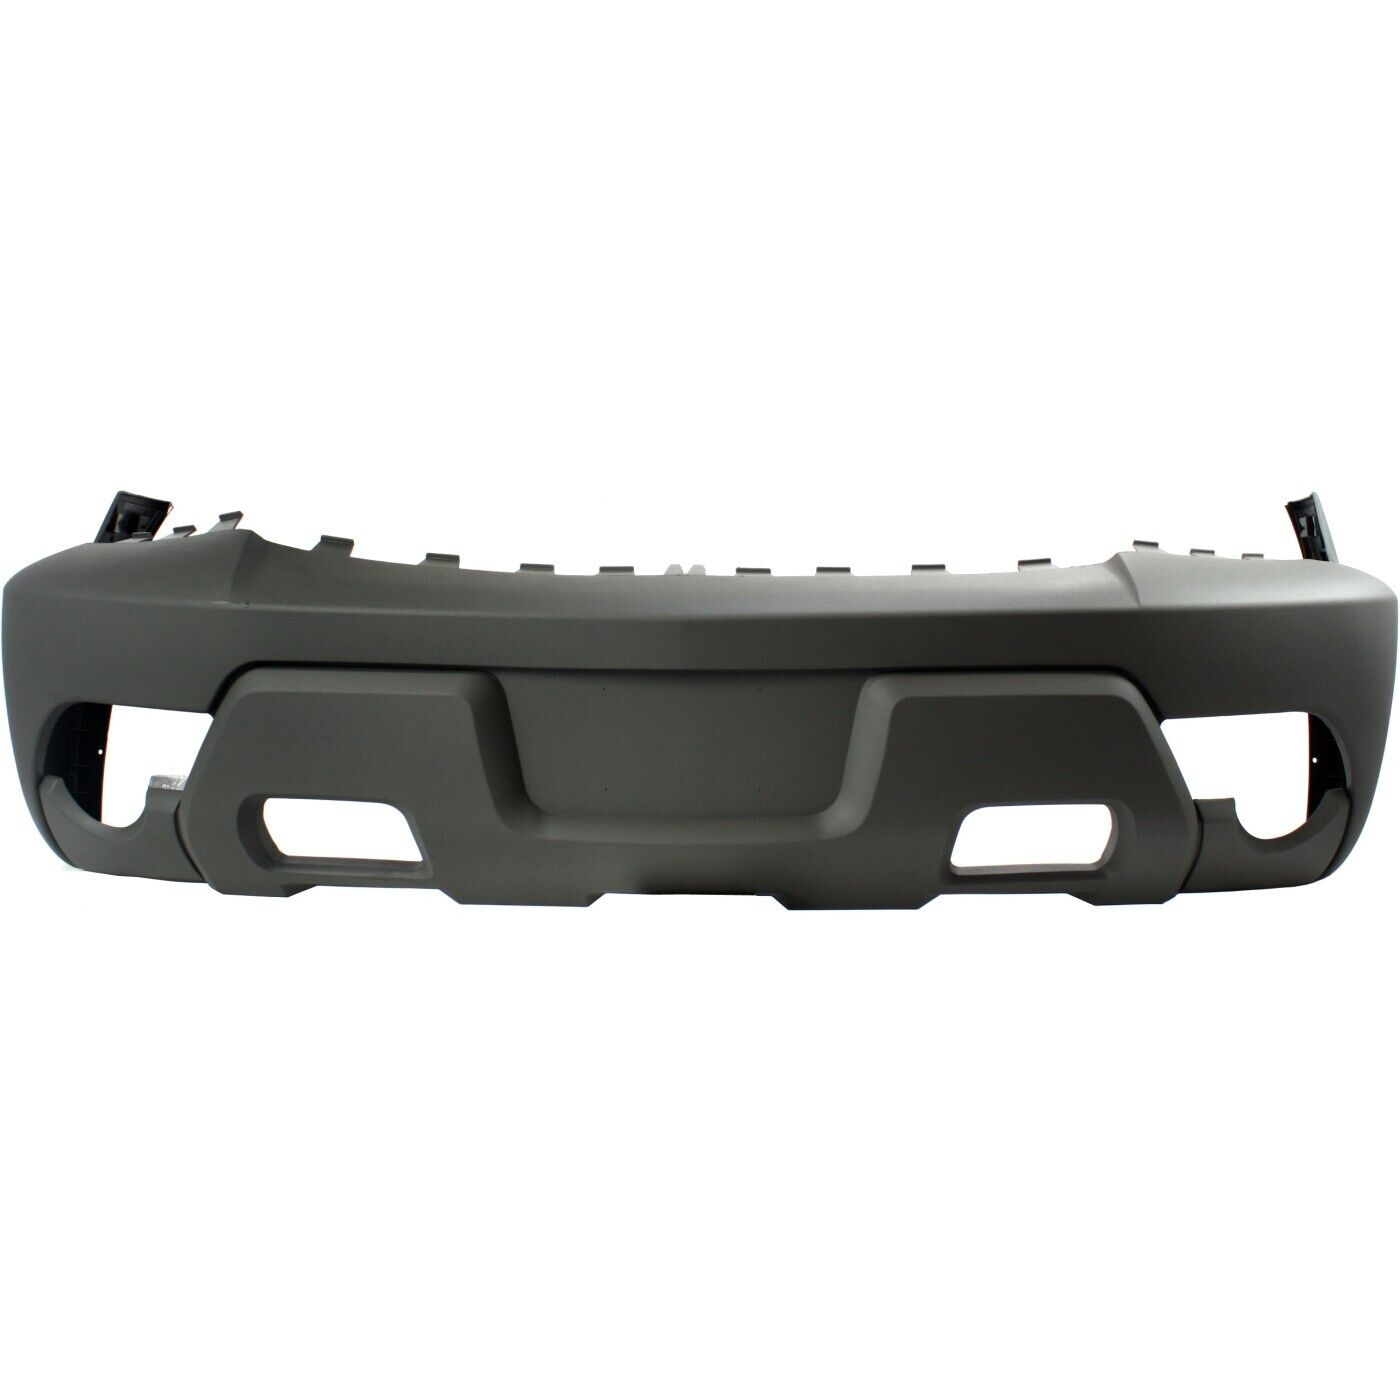 Front Bumper Cover For 2002 Chevy Avalanche 1500 Textured With Fog Light Holes